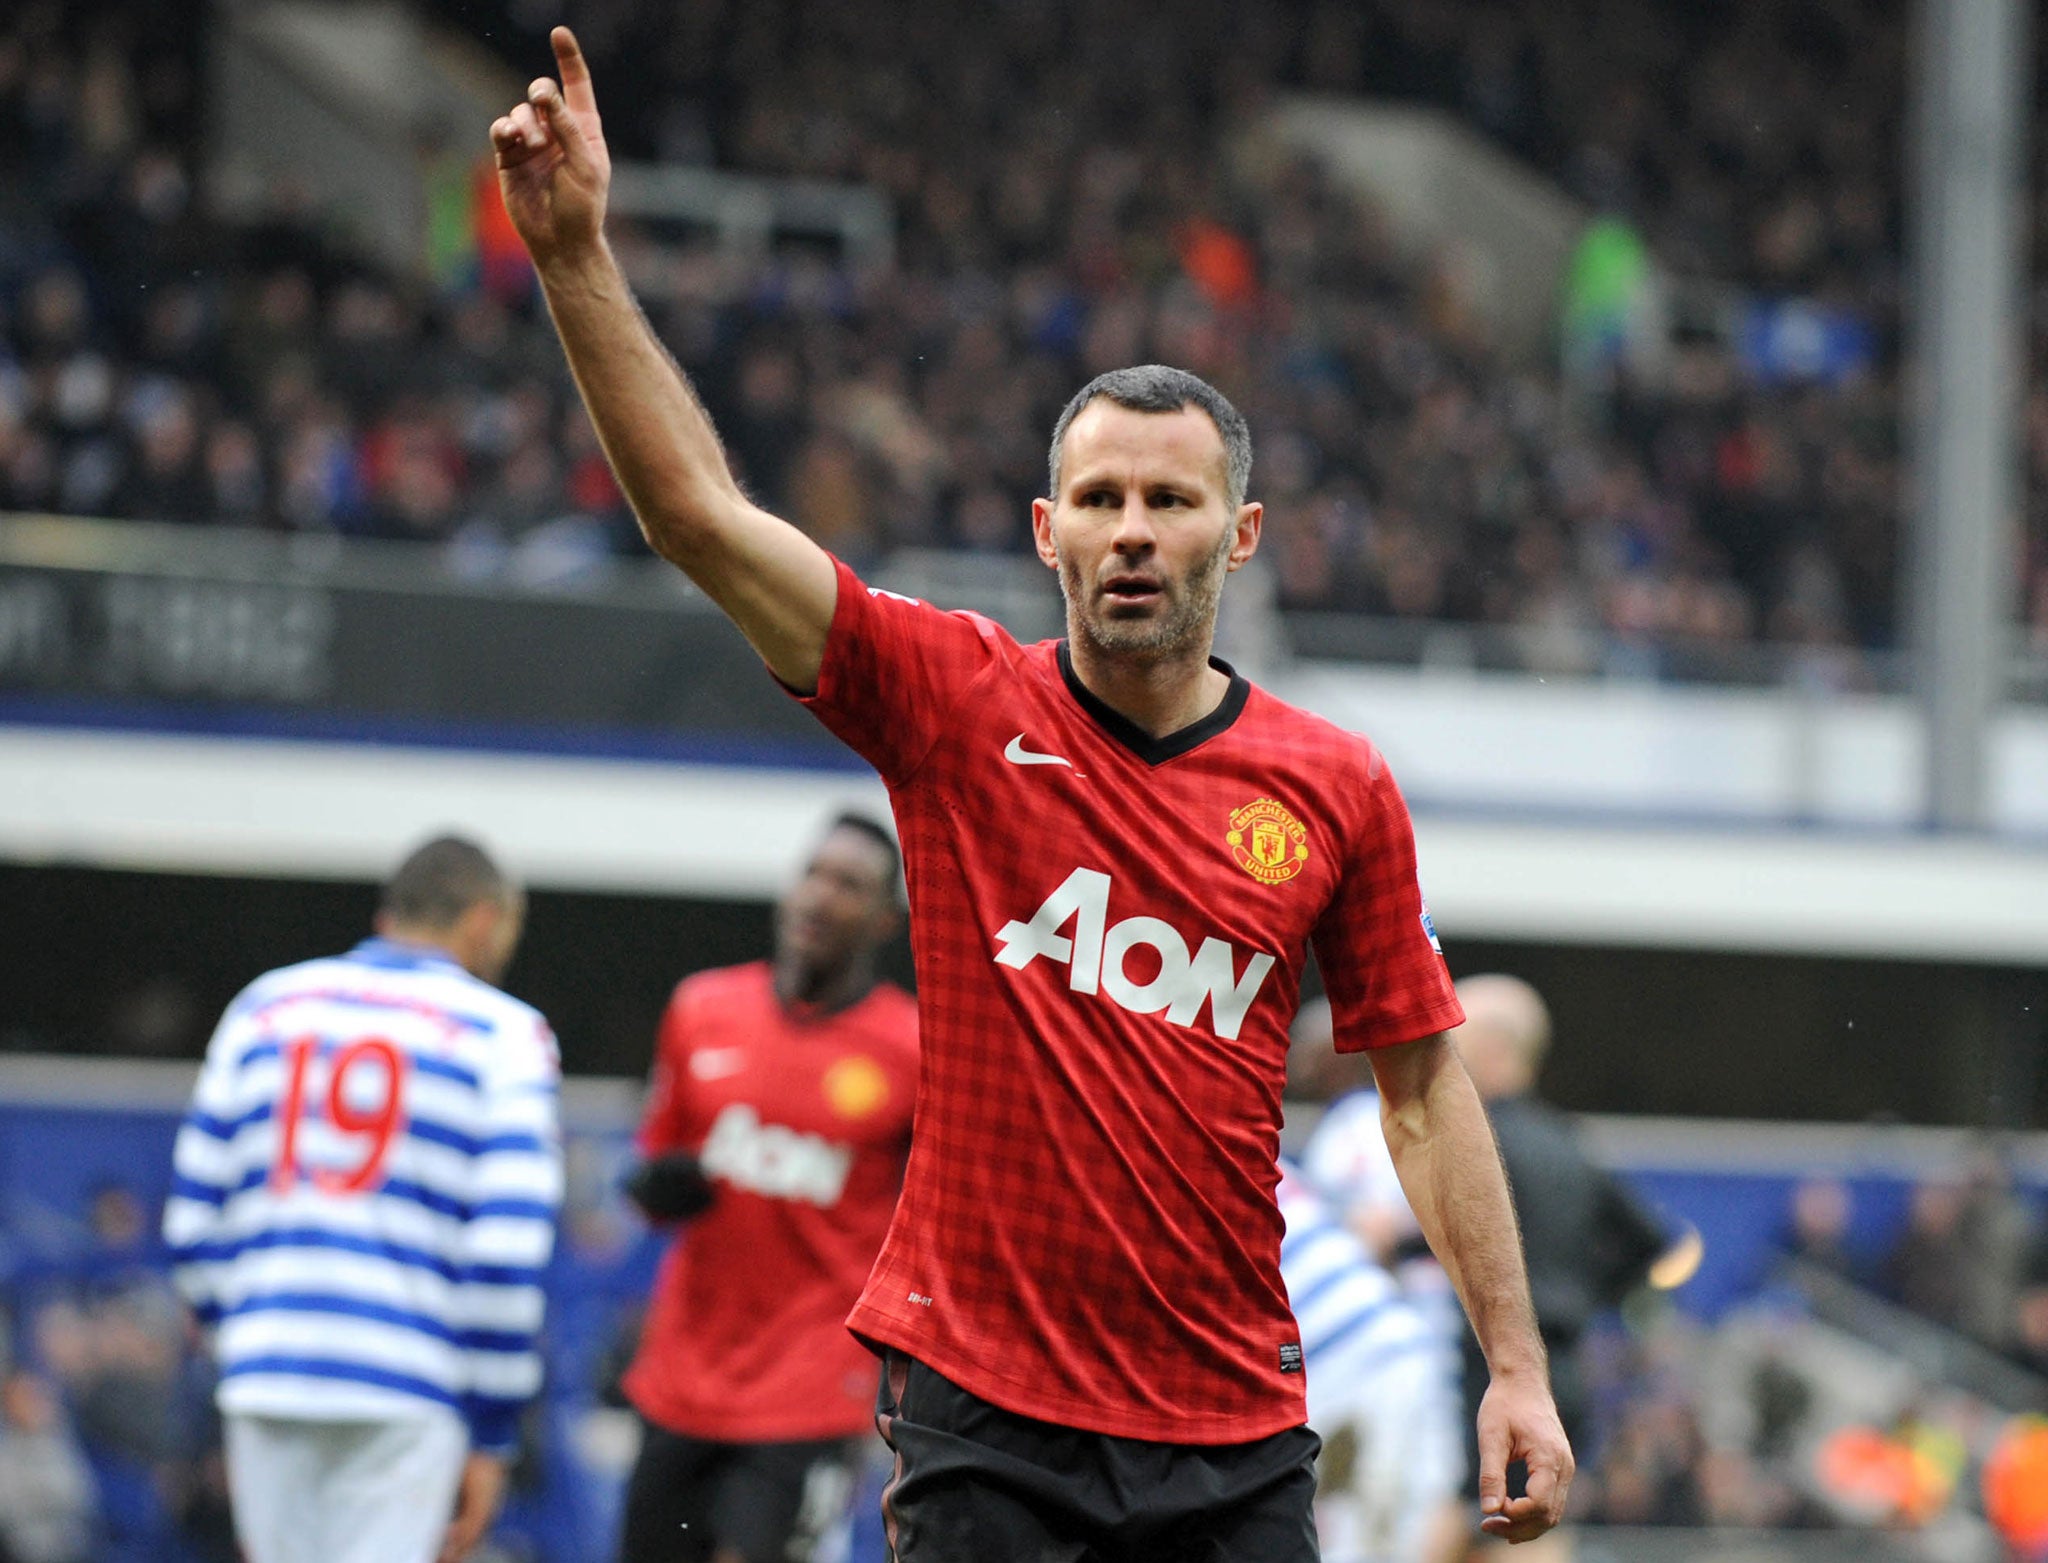 5. Ryan Giggs makes his 1000th senior appearance tonight, and will be keen to cap the night with a vintage performance. Though a note of caution- he has never scored against Real, in five previous matches